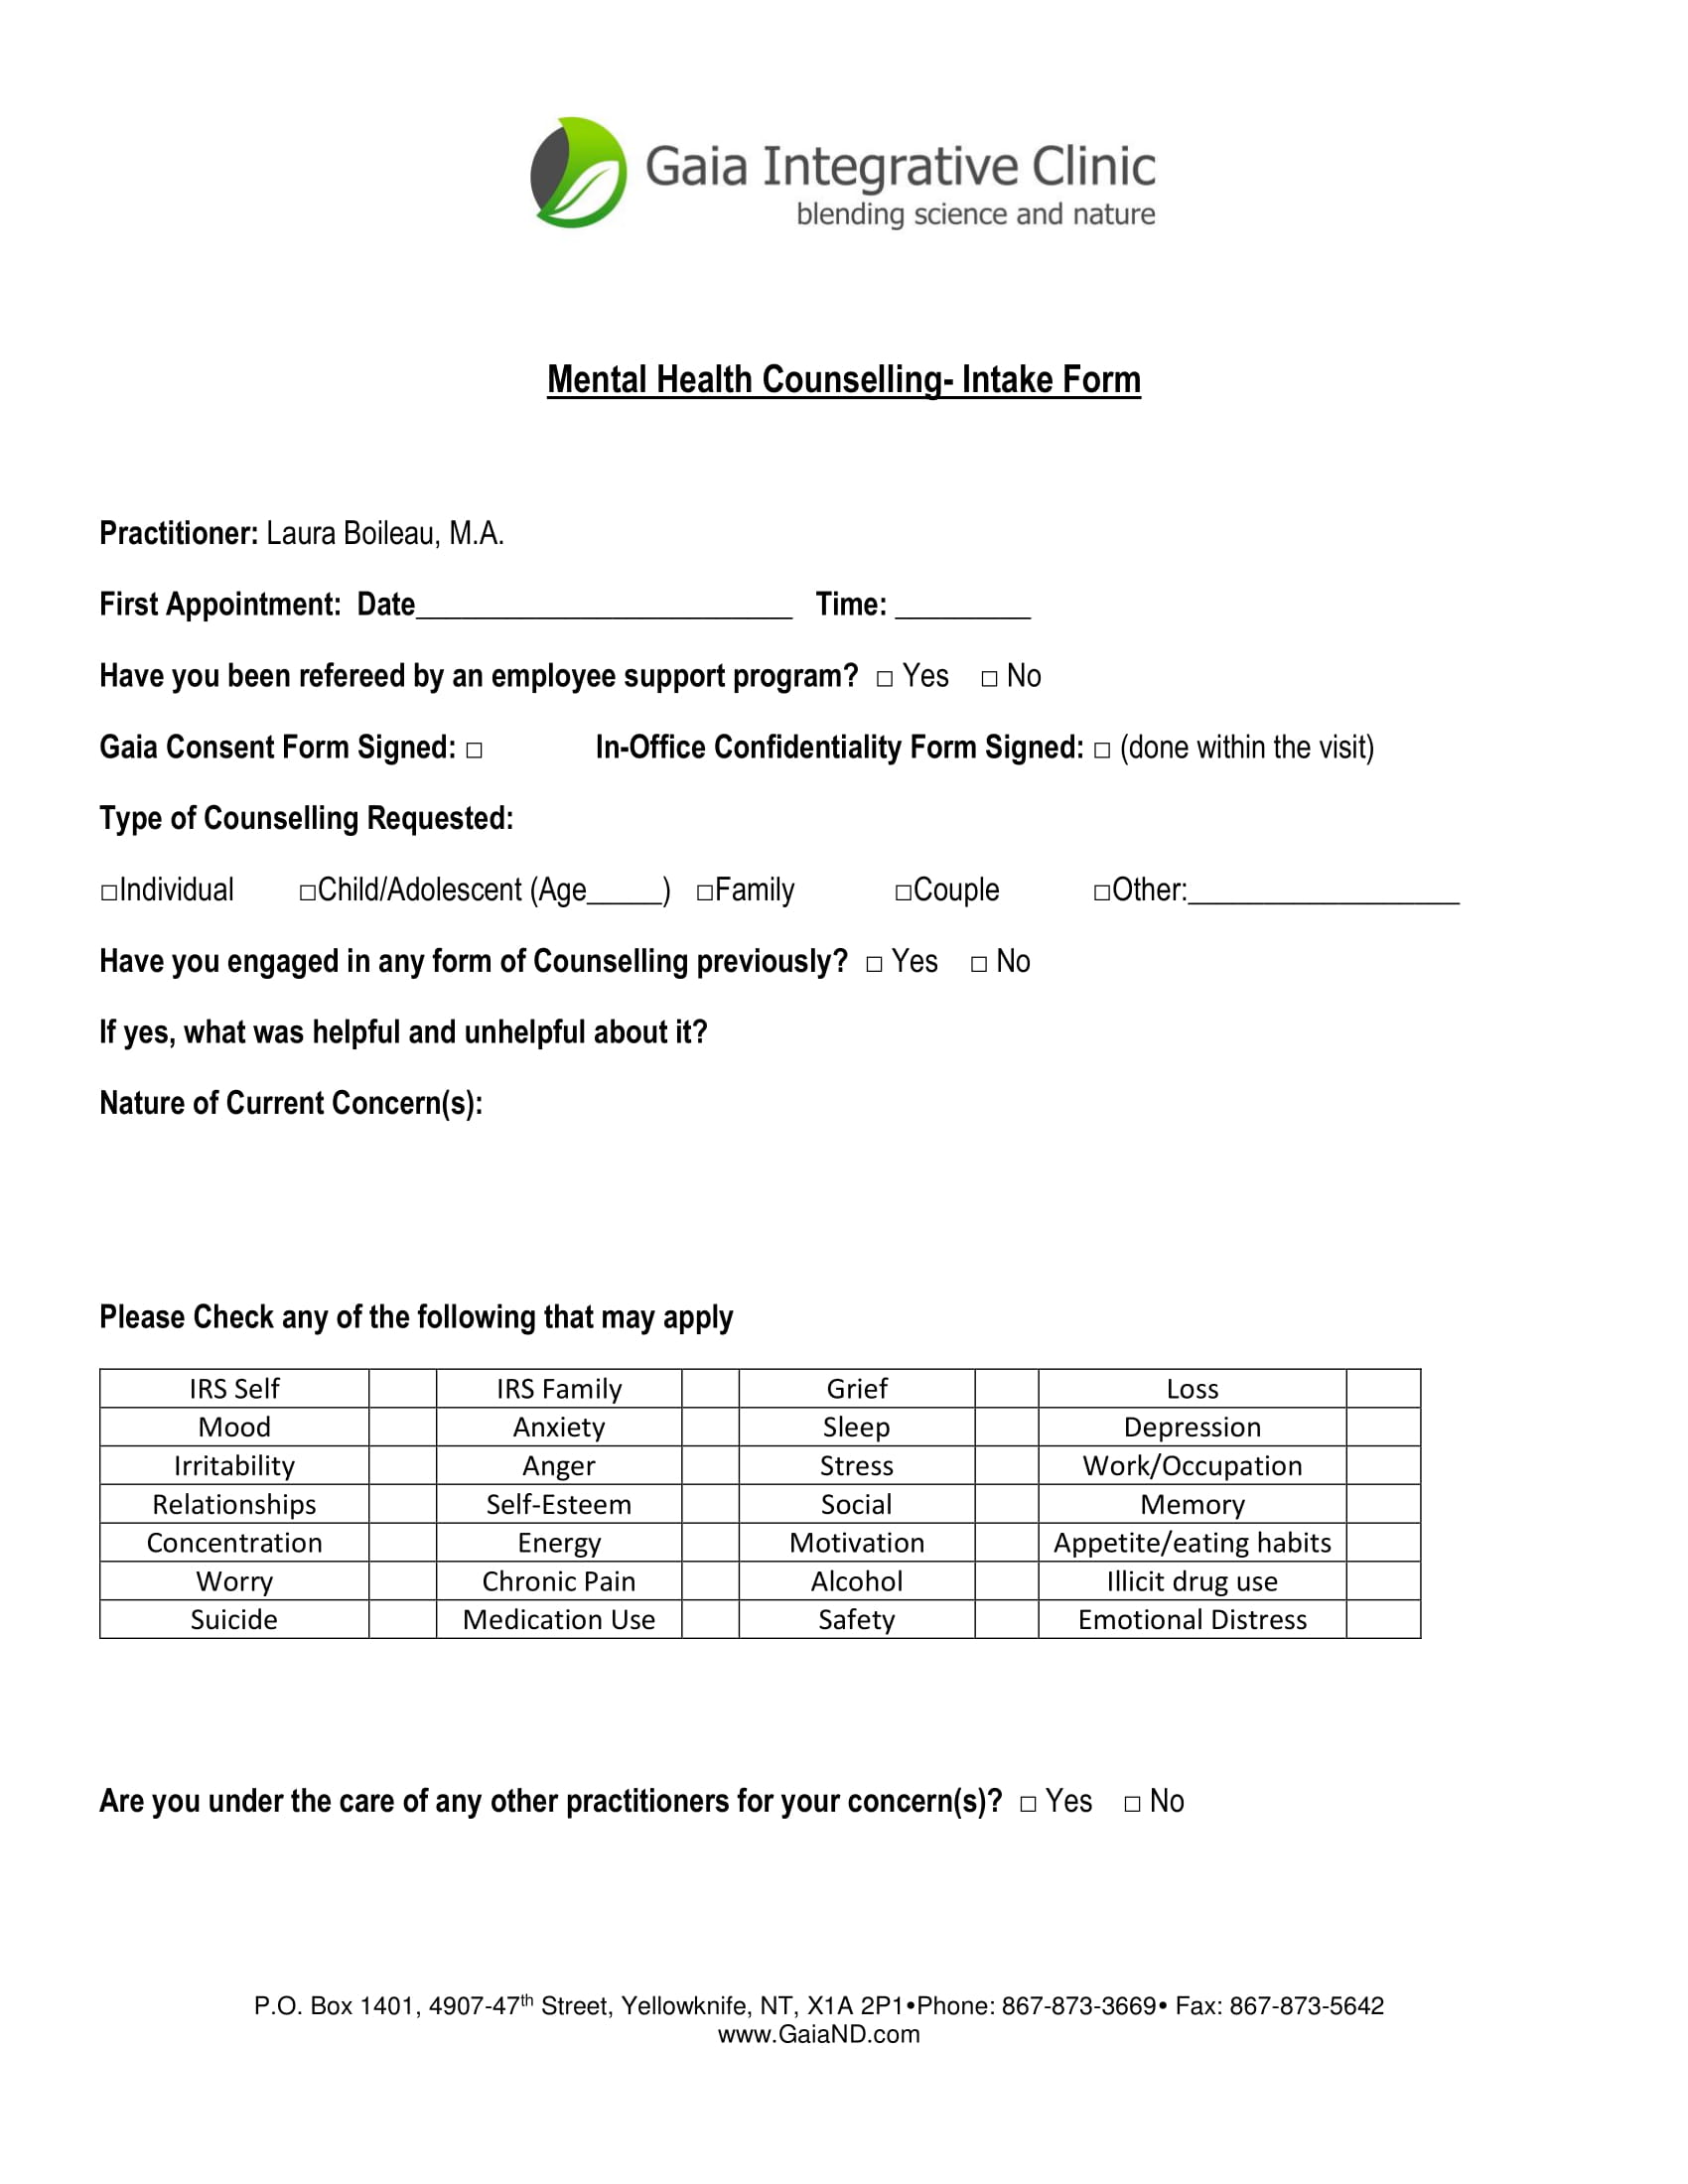 mental health counselling intake form 1